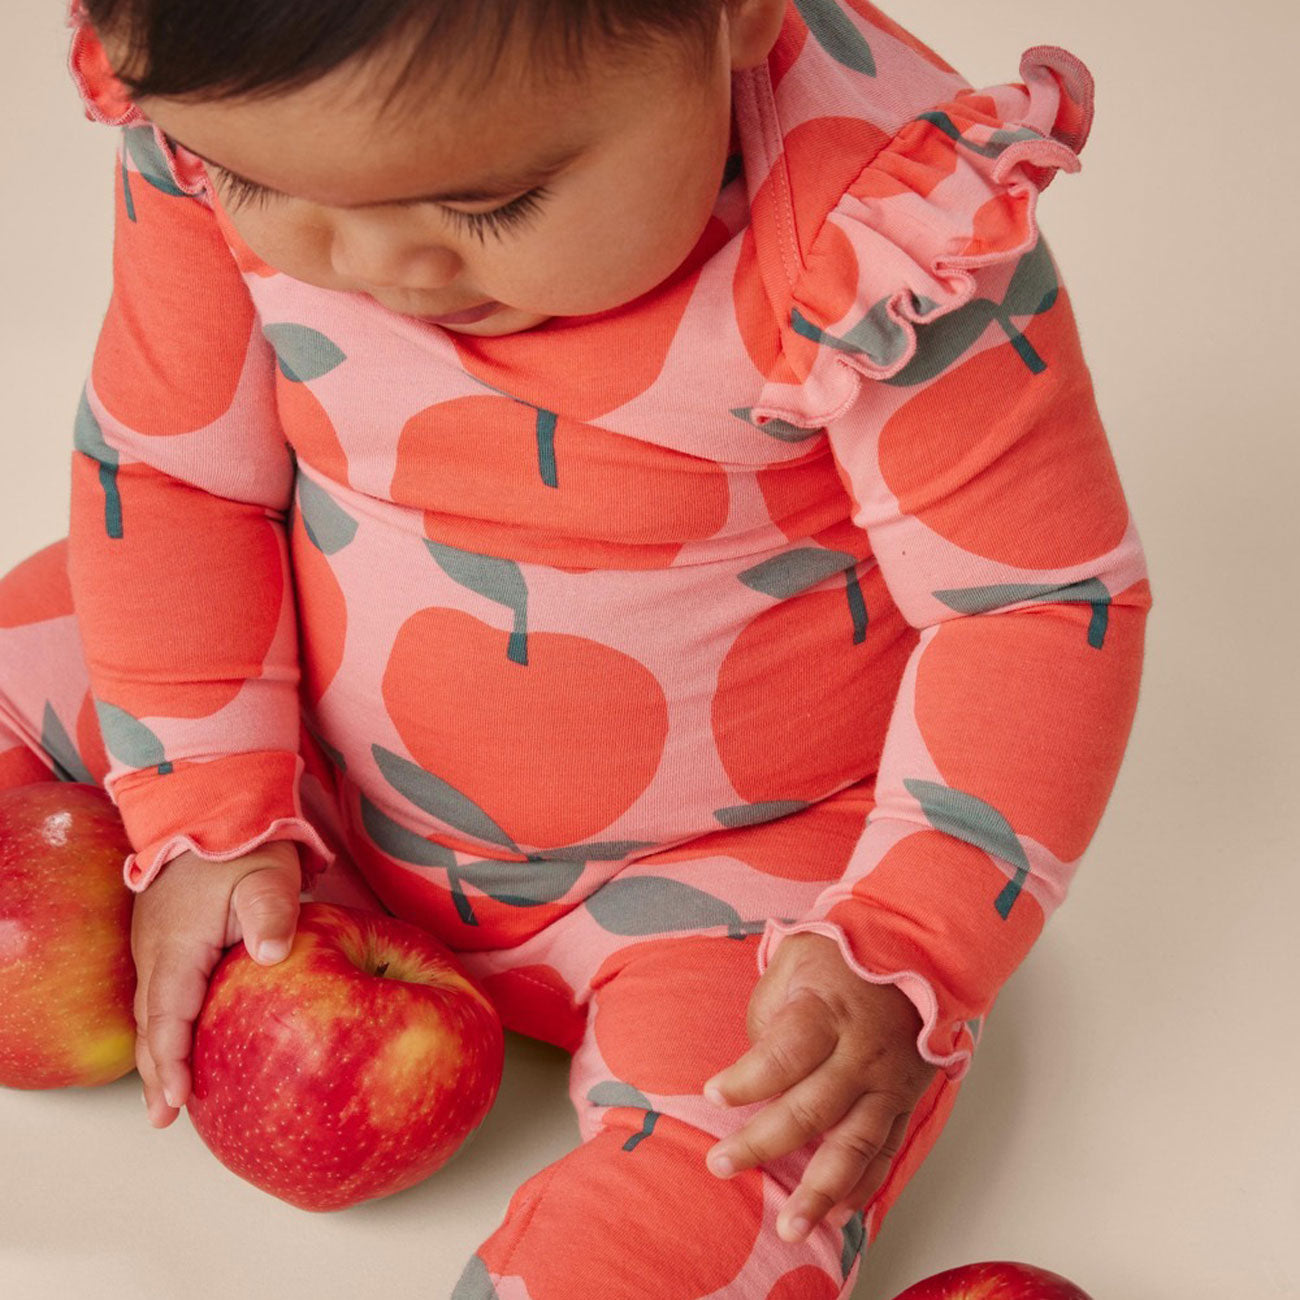 Baby wearing Tea Collection Ruffle Shoulder Baby Romper - Normandy Apples